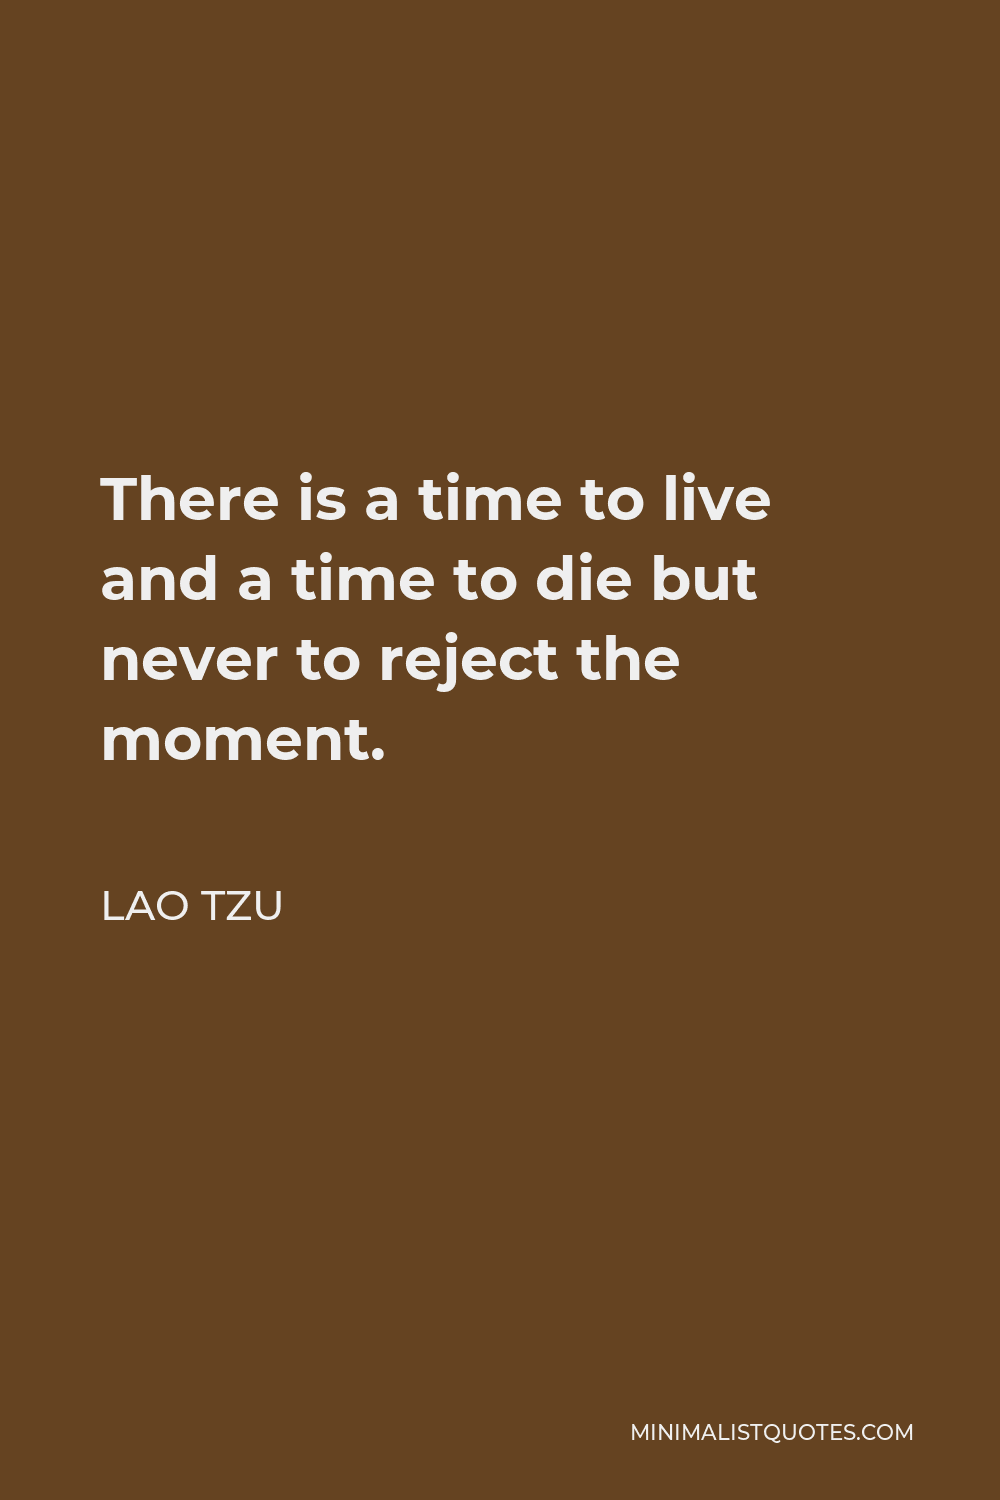 Lao Tzu Quote - There is a time to live and a time to die but never to reject the moment.